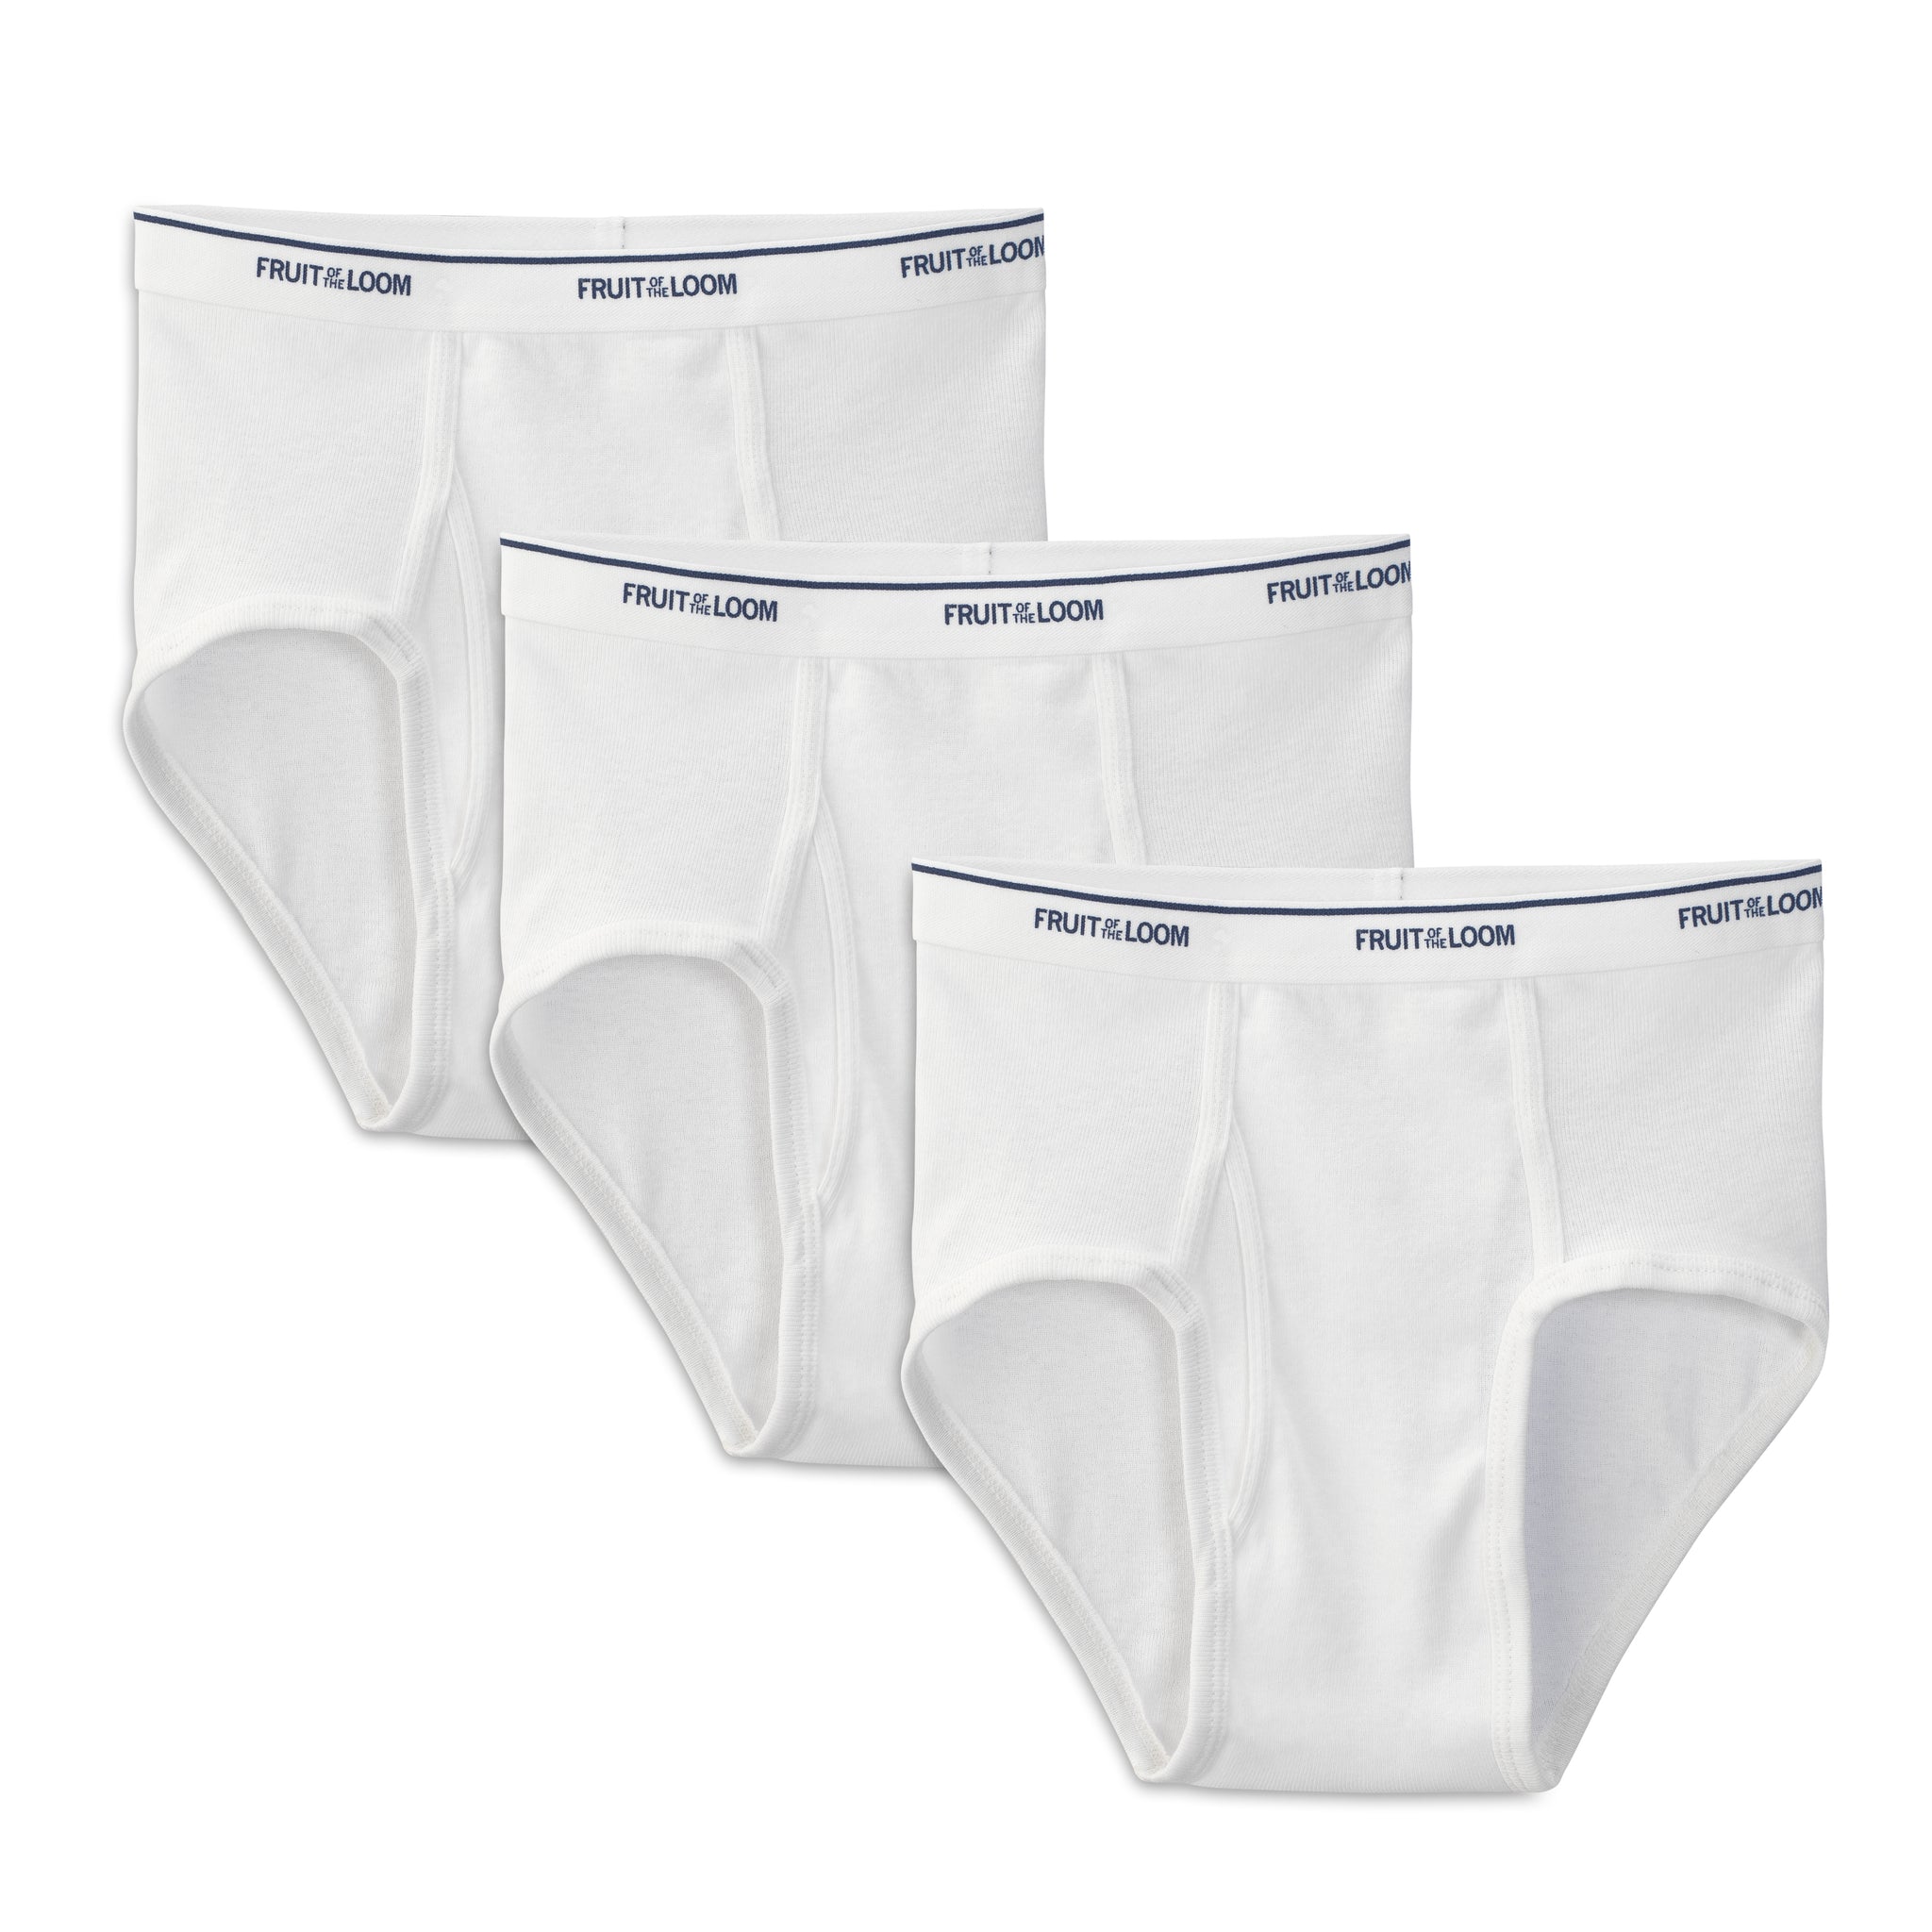 Fruit Of The Loom Fruit Of The Loom 5 Pairs Cotton Underwear Size